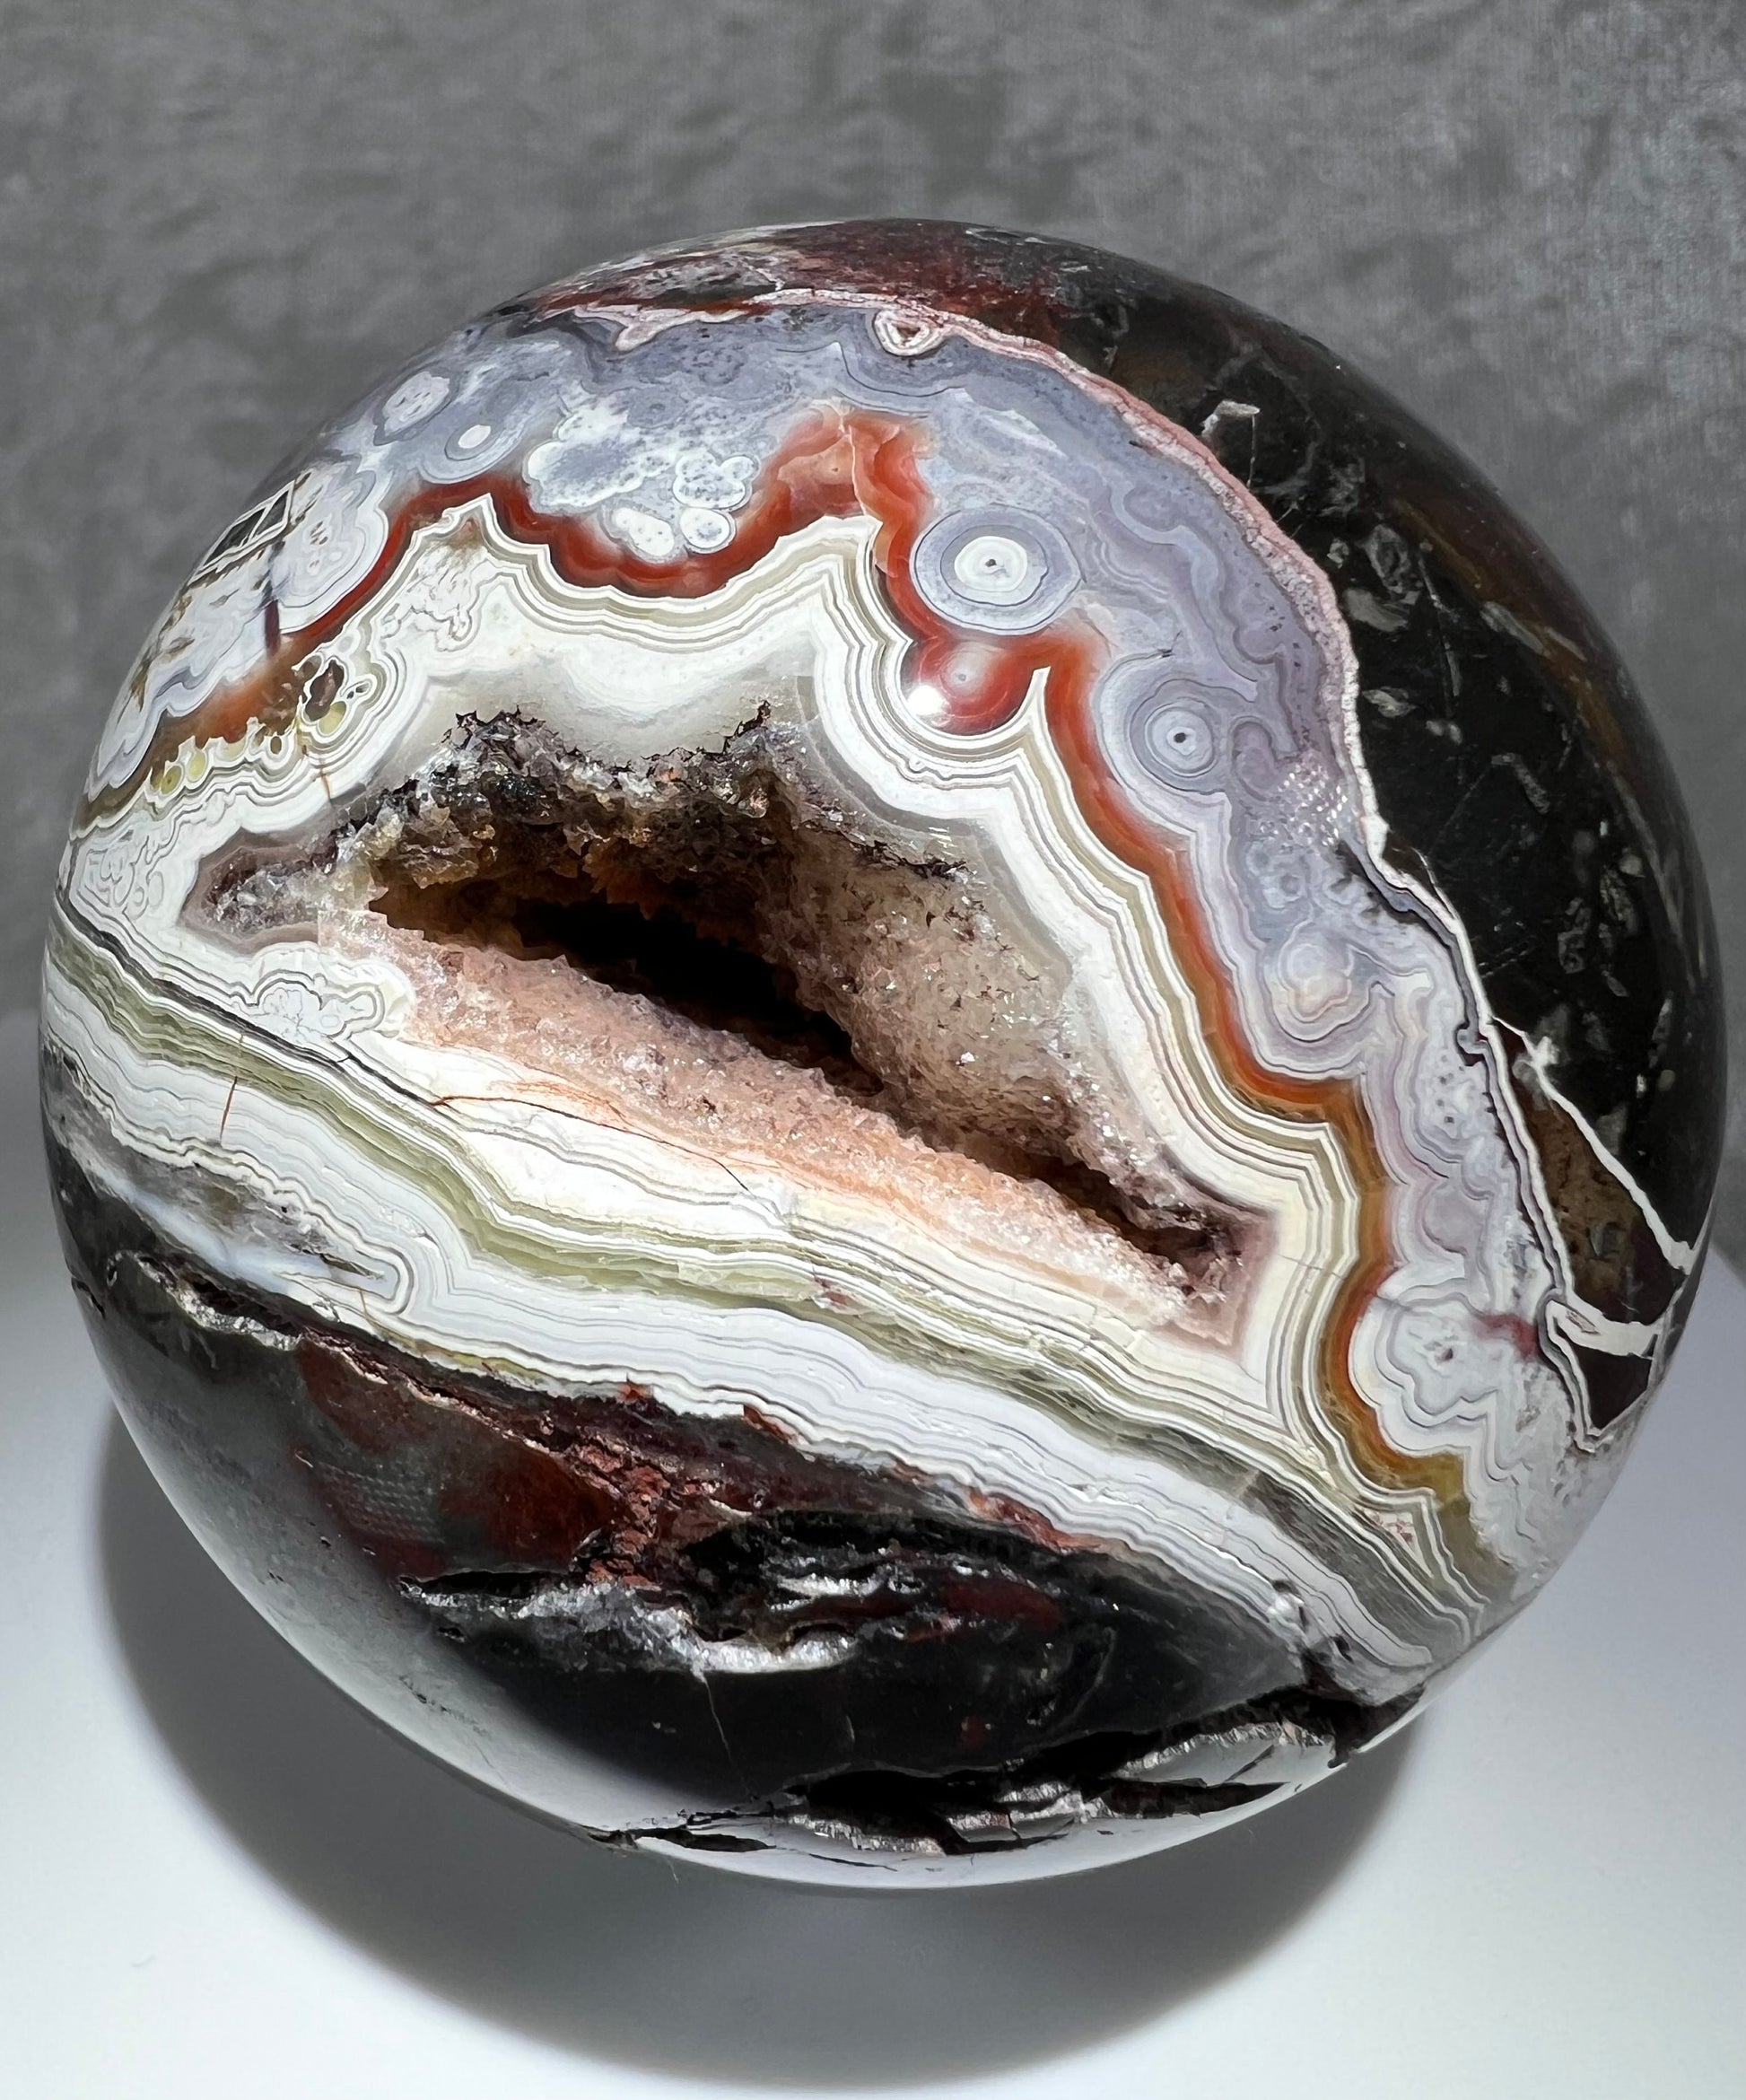 Druzy Mexican Crazy Lace Agate Sphere. 71mm. Beautiful Sugar Druzy With Incredible Patterns And Lacing.